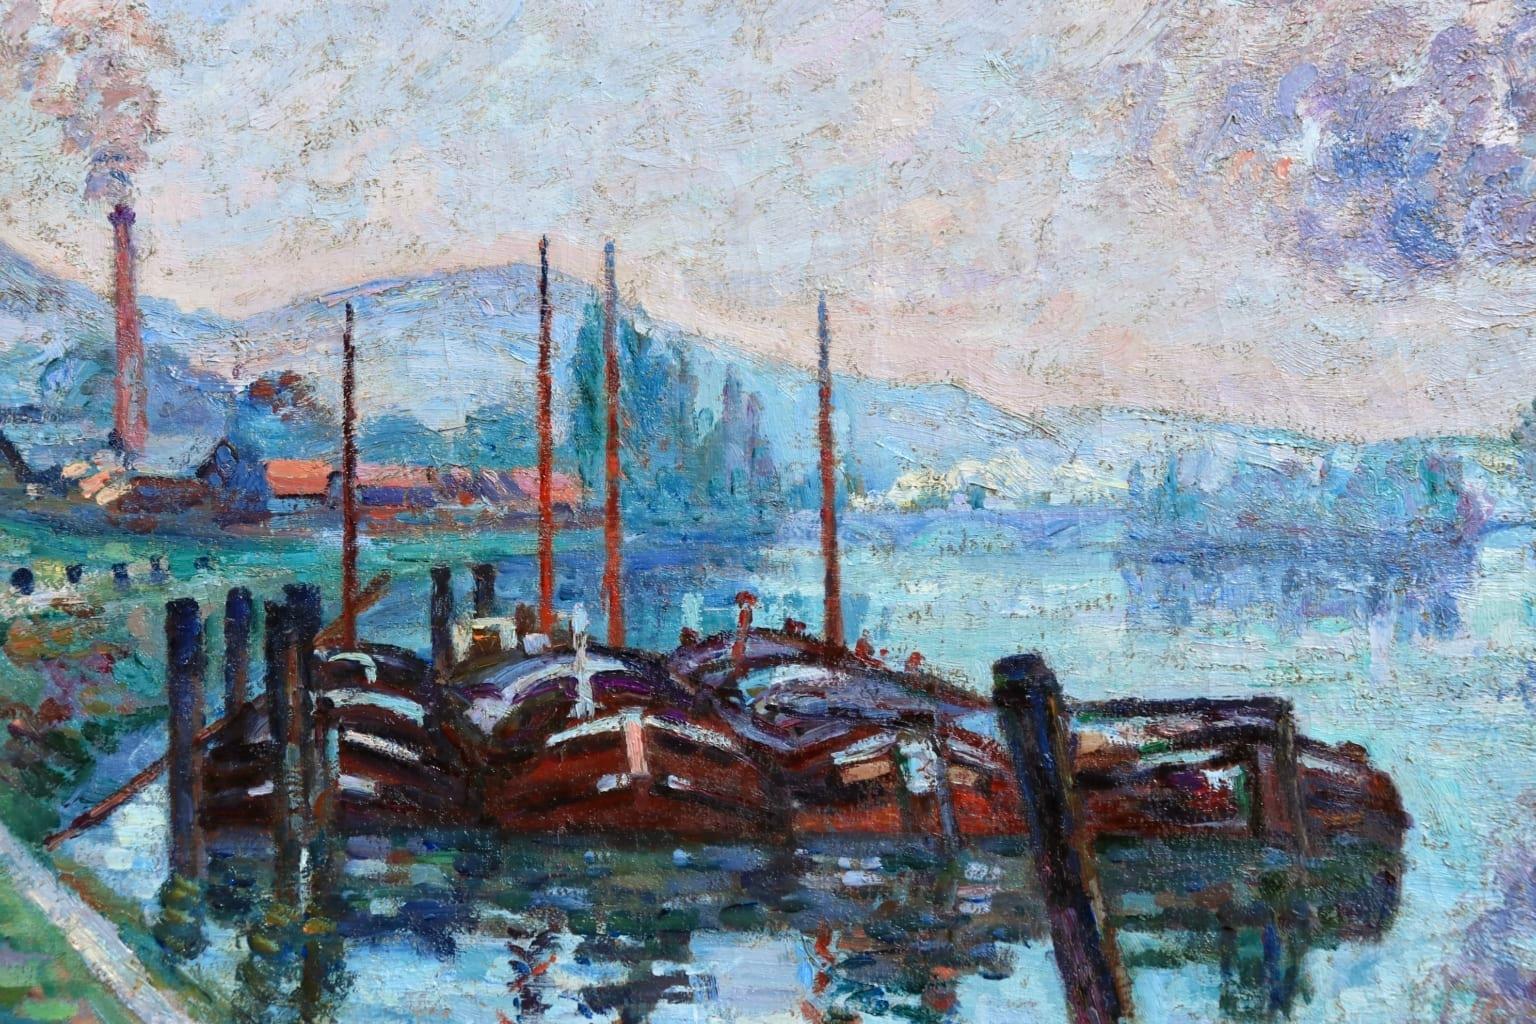 Morning Rouen - Impressionist Oil, Boats on River Landscape by Armand Guillaumin - Blue Figurative Painting by Jean Baptiste-Armand Guillaumin